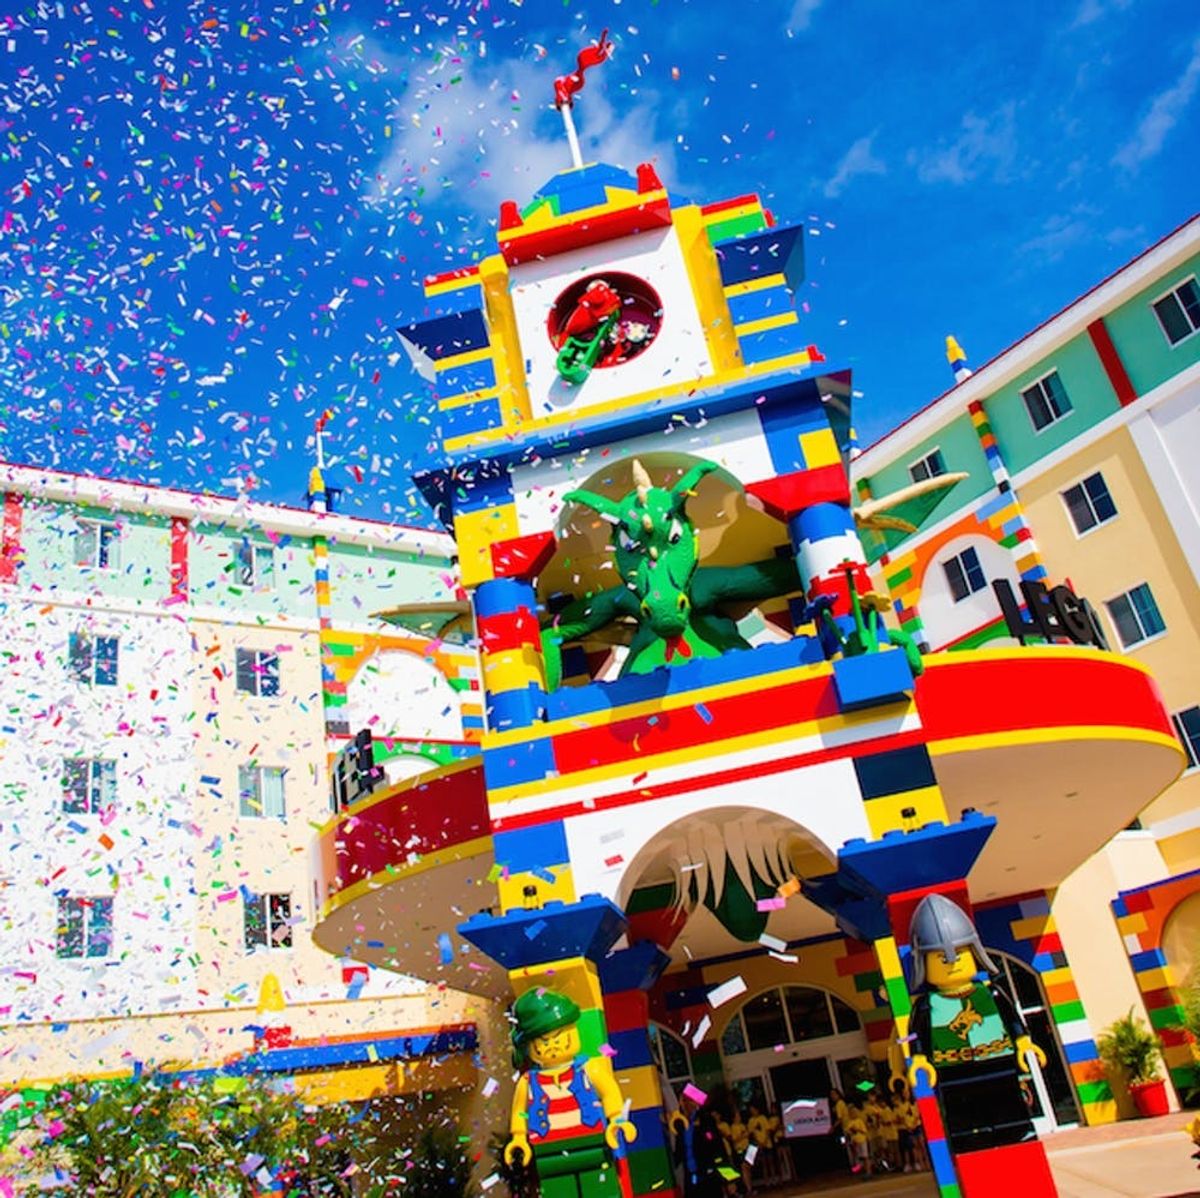 The New LEGOLAND Hotel Is Every ’80s + ’90s Kid’s Dream